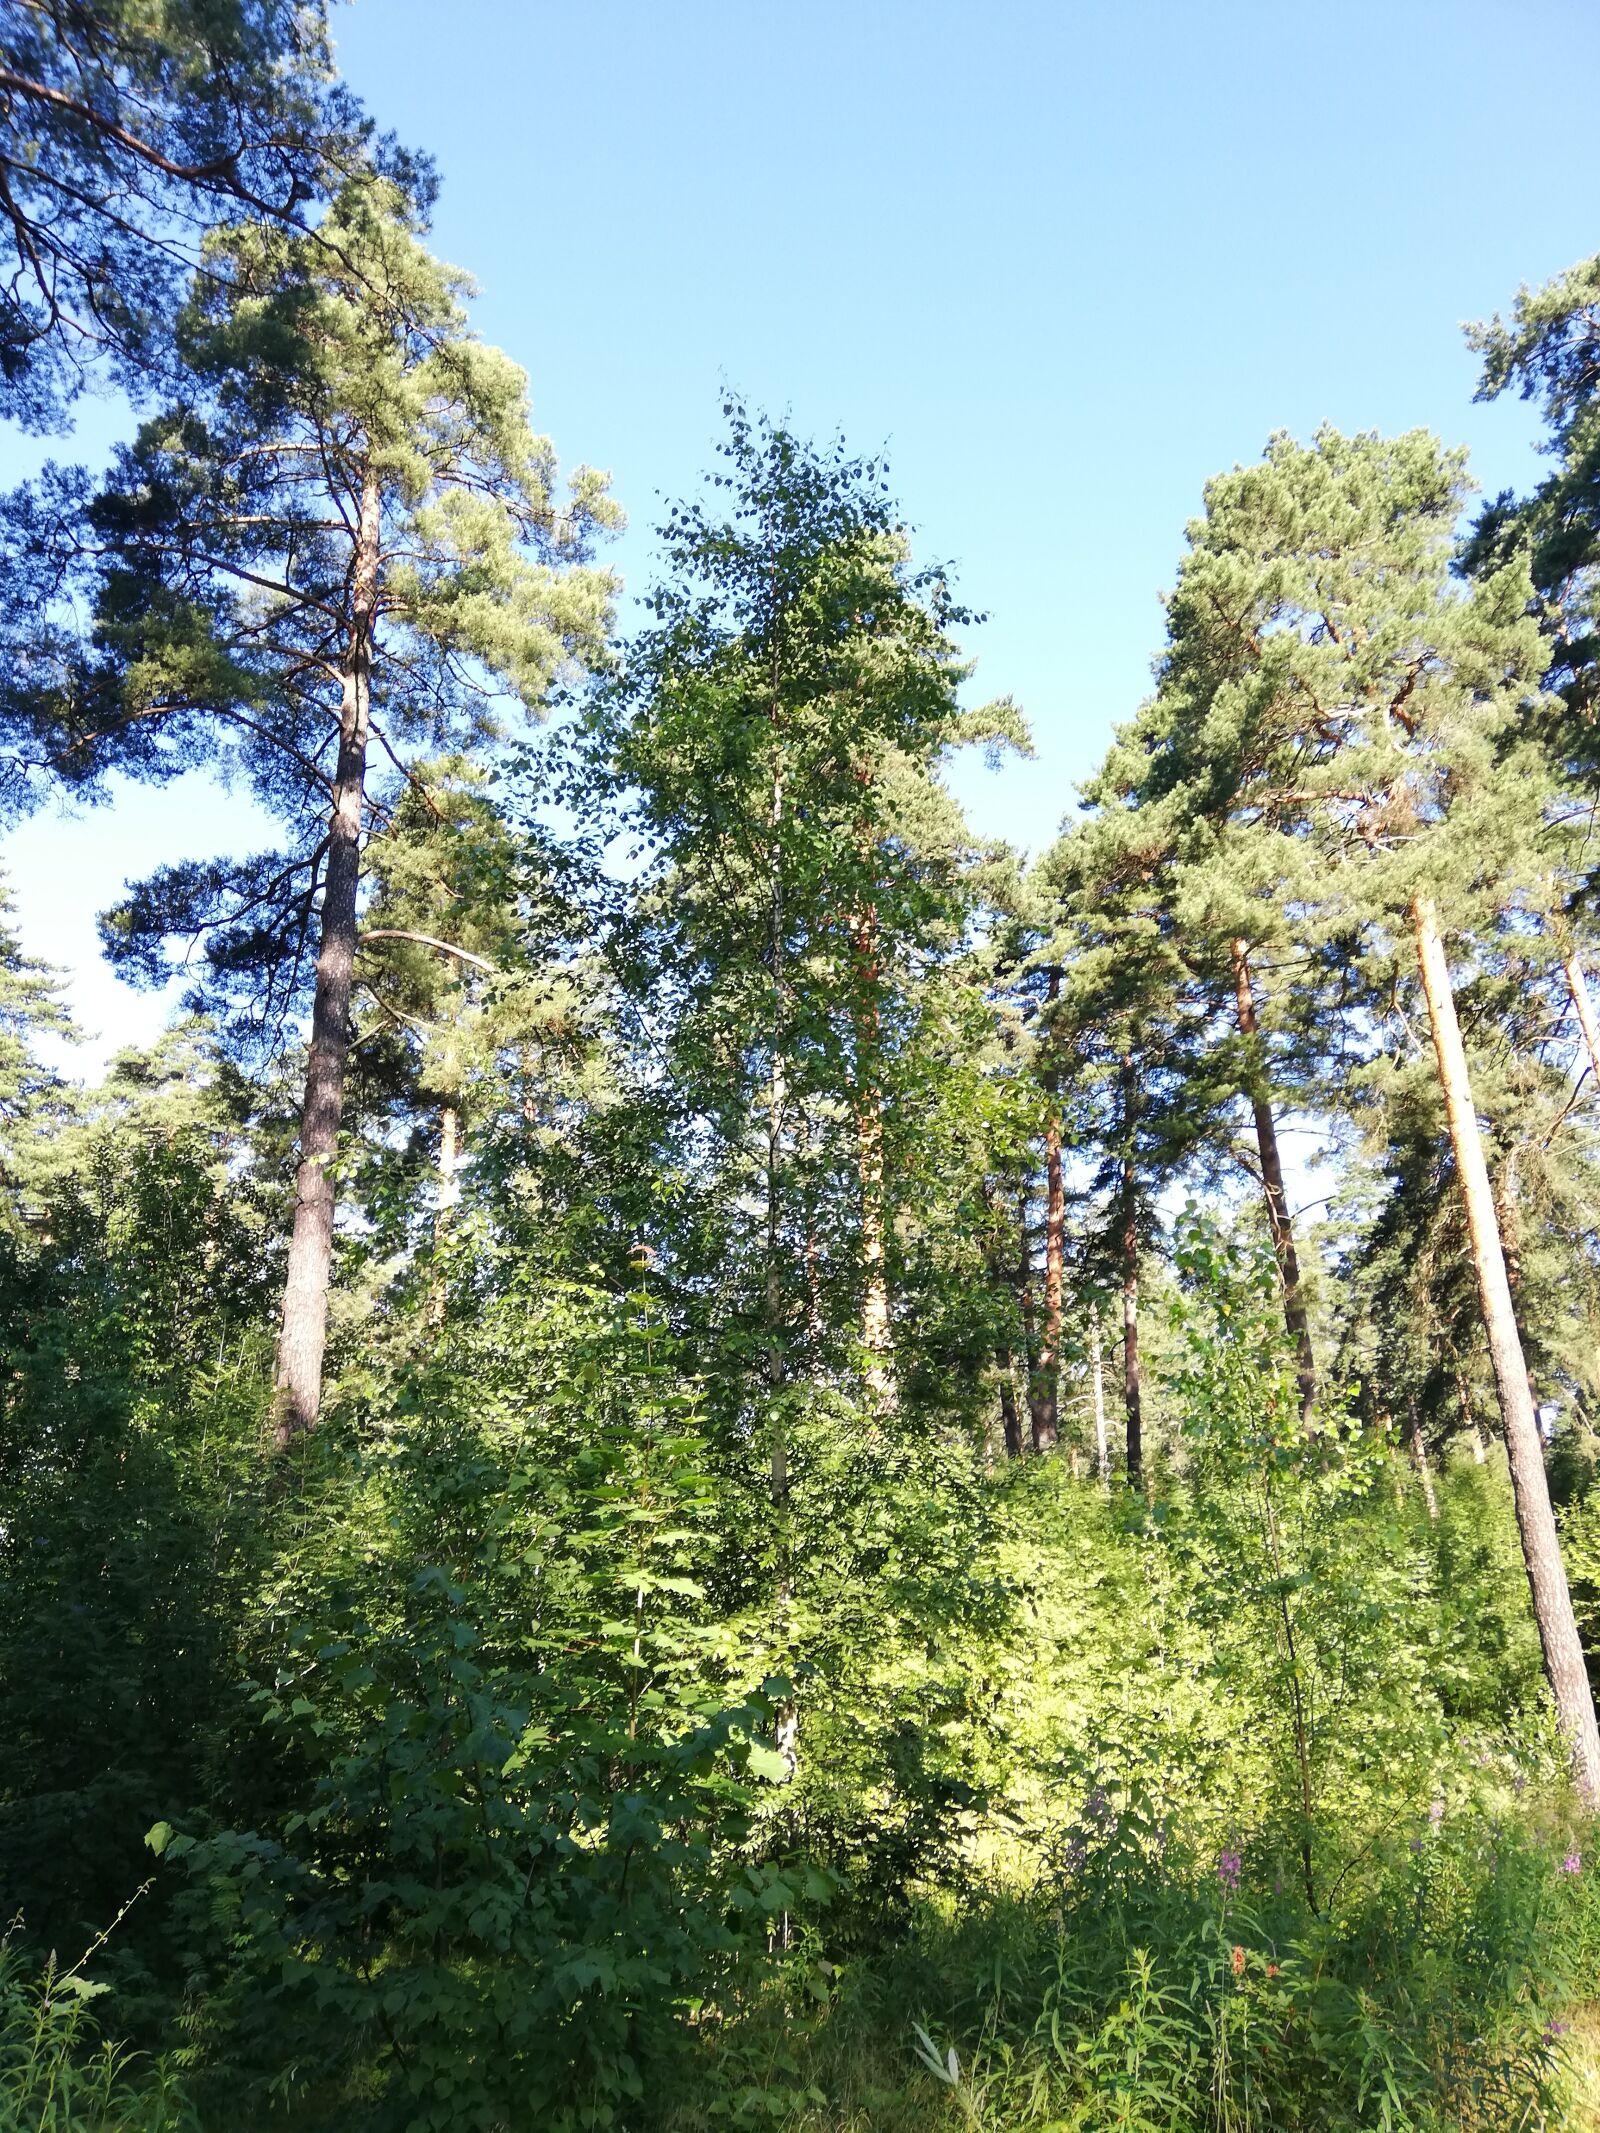 HUAWEI P20 lite sample photo. Forest, trees, day photography